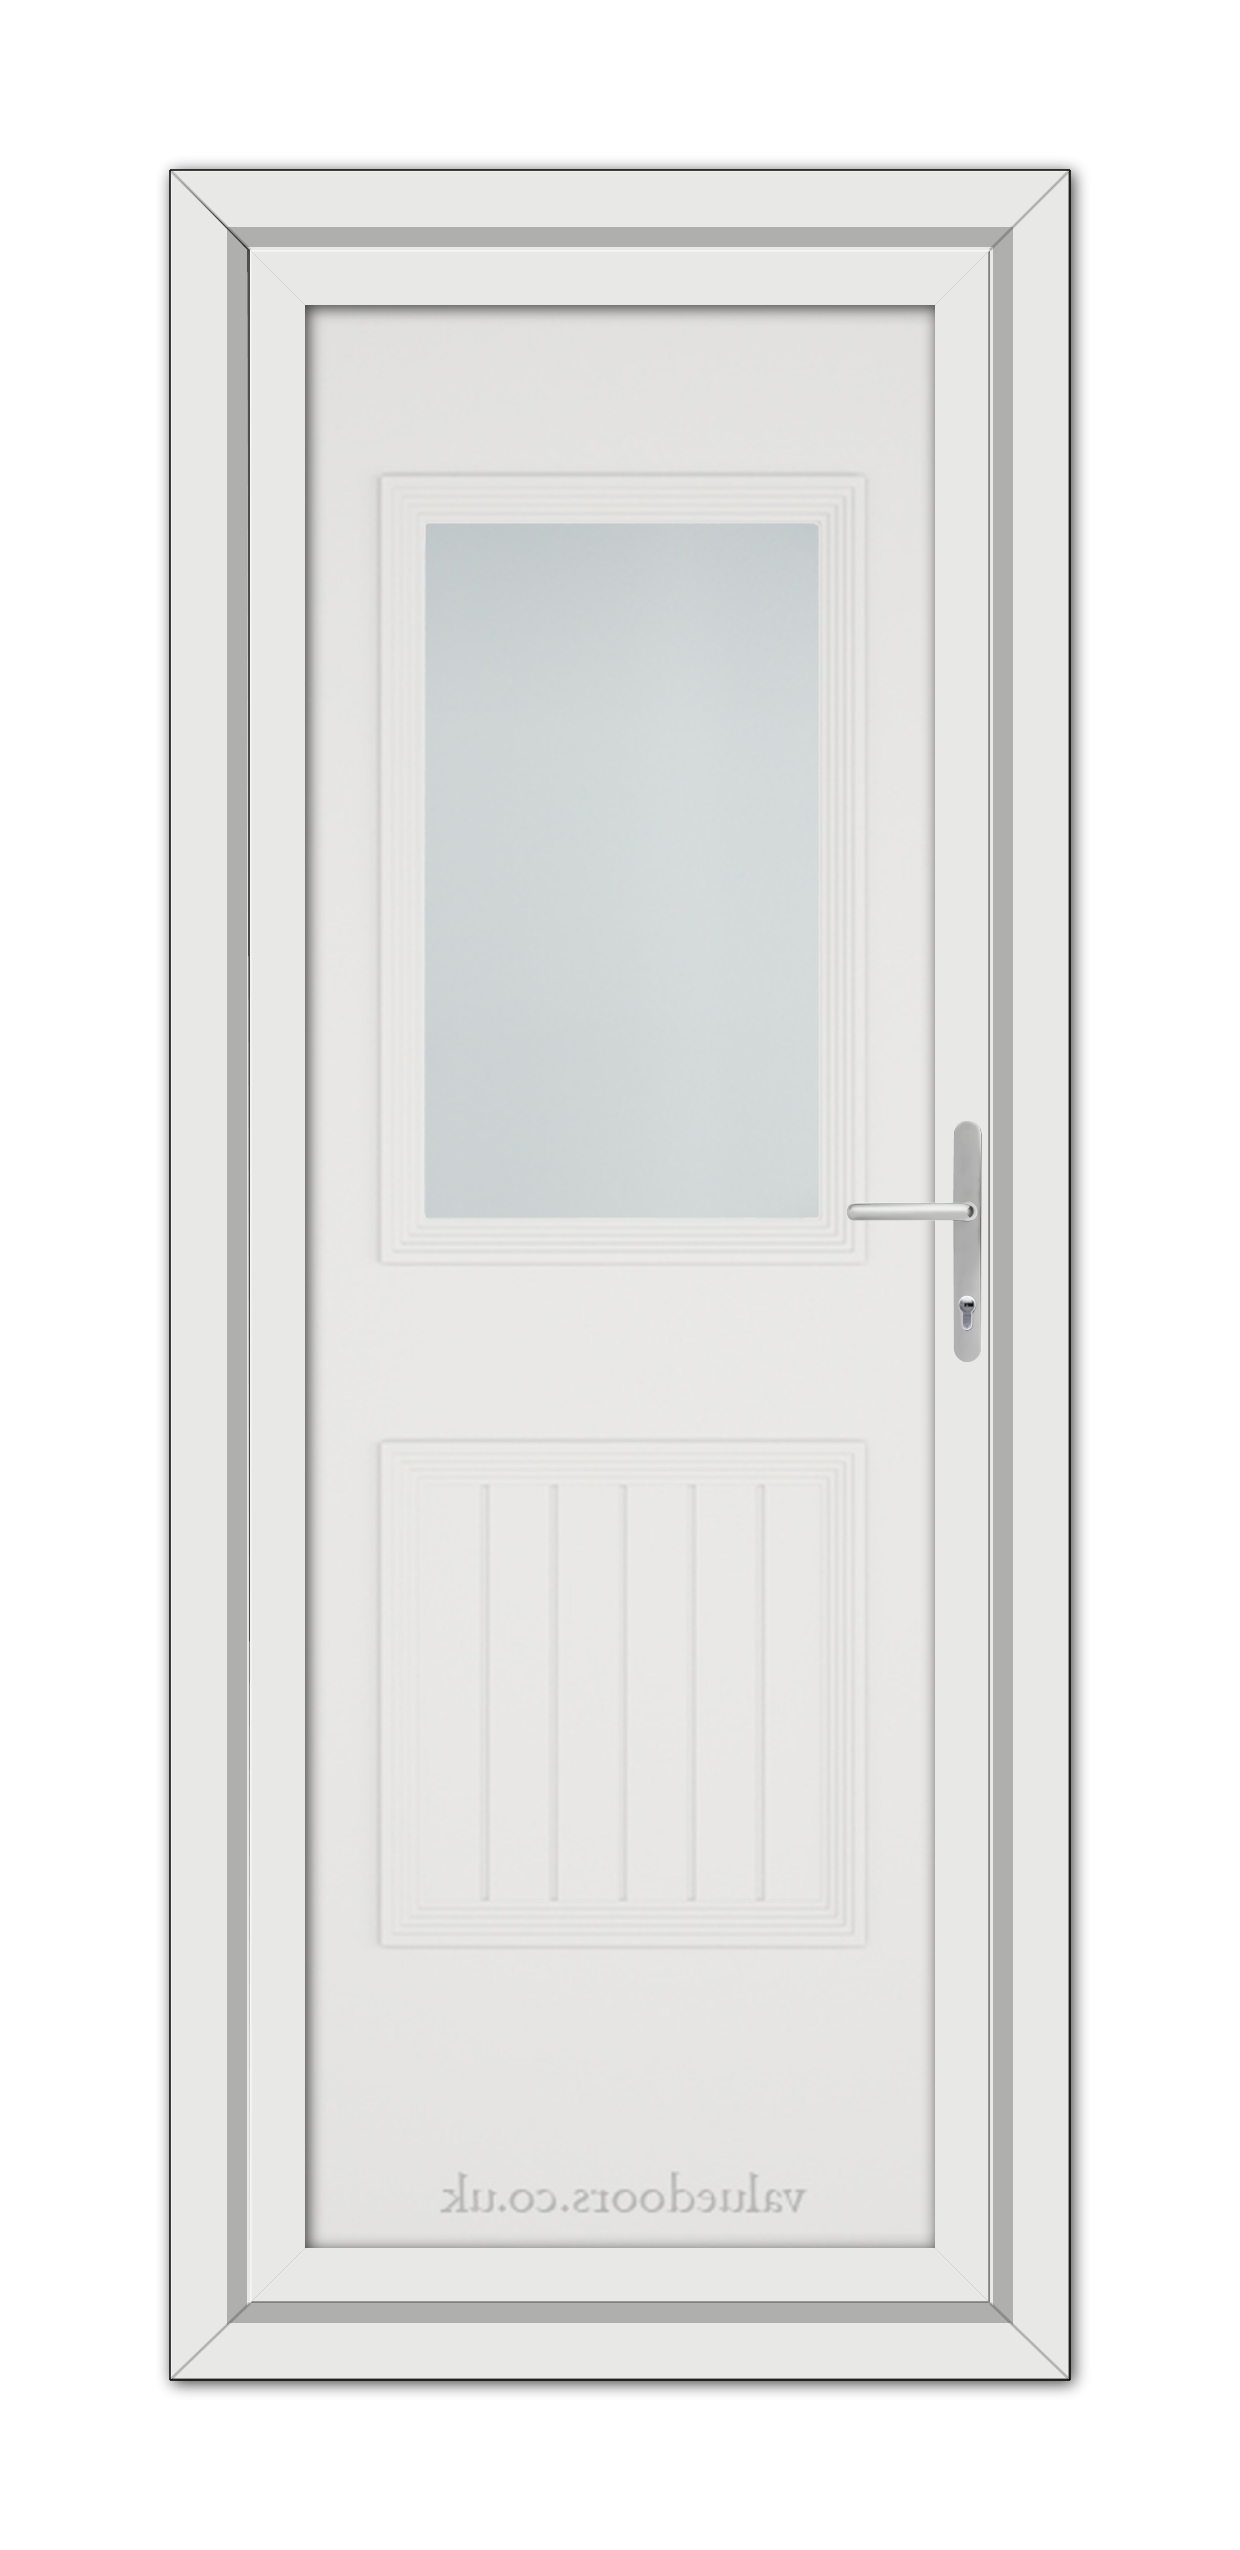 A vertical image of a White Alnwick One uPVC Door with a frosted glass panel at the top and a panel design at the bottom, featuring a silver handle on the right side.